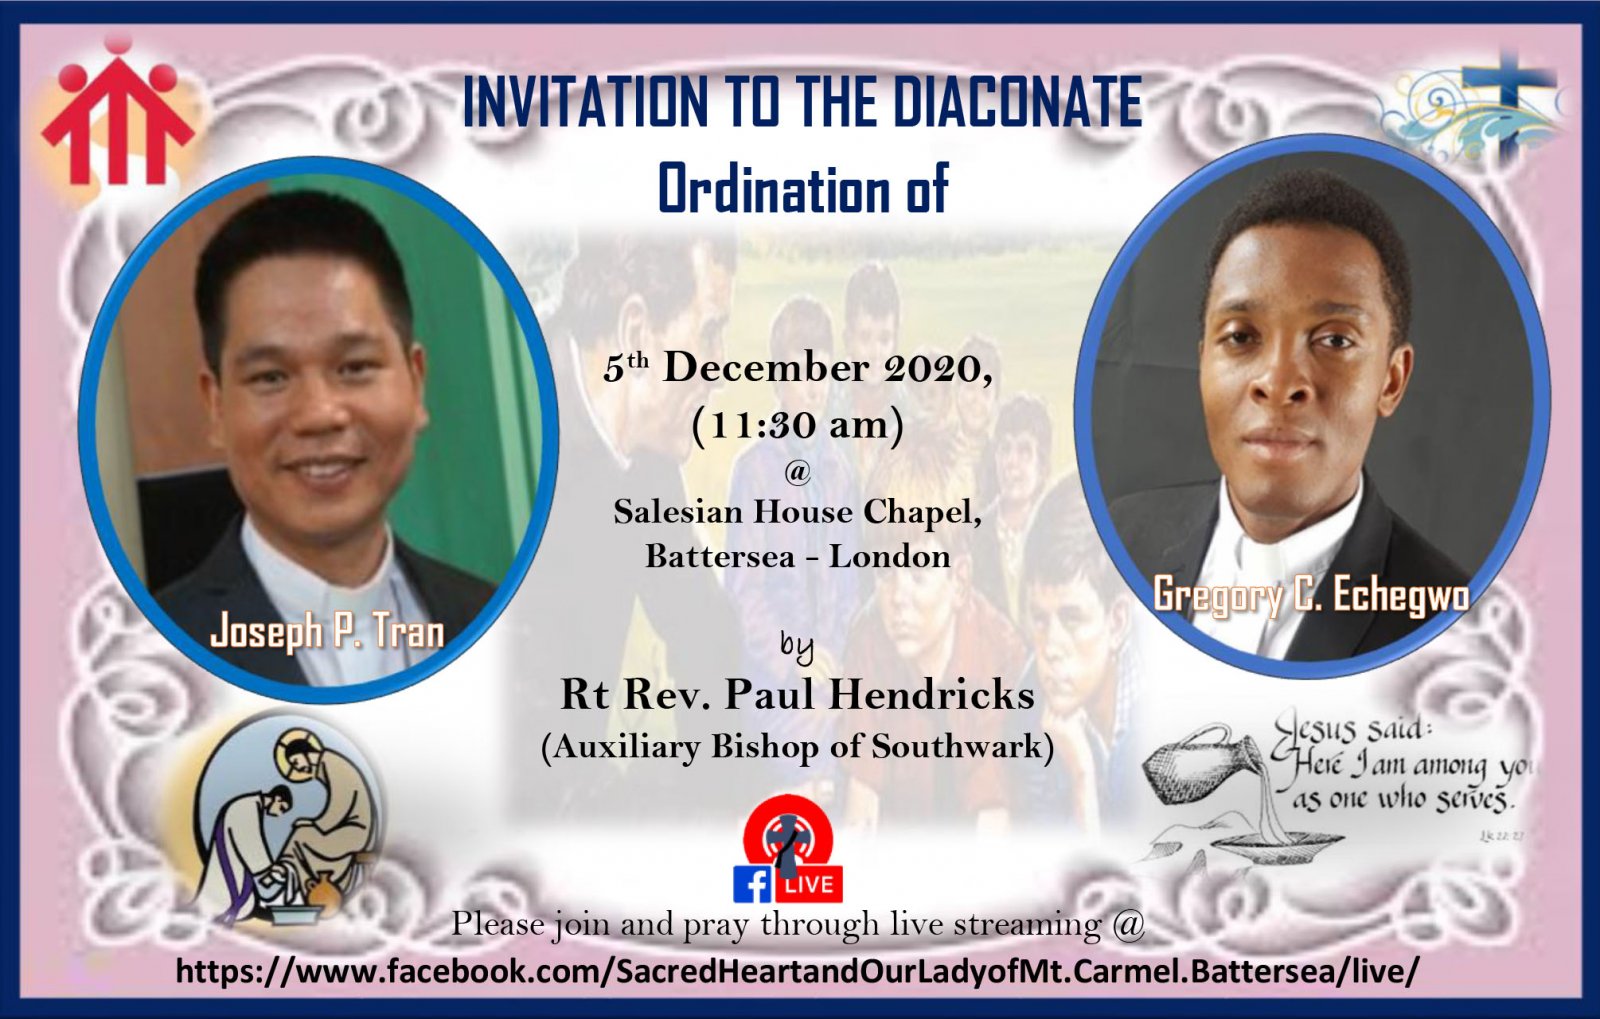 Brs Joe and Greg to be ordained Deacons